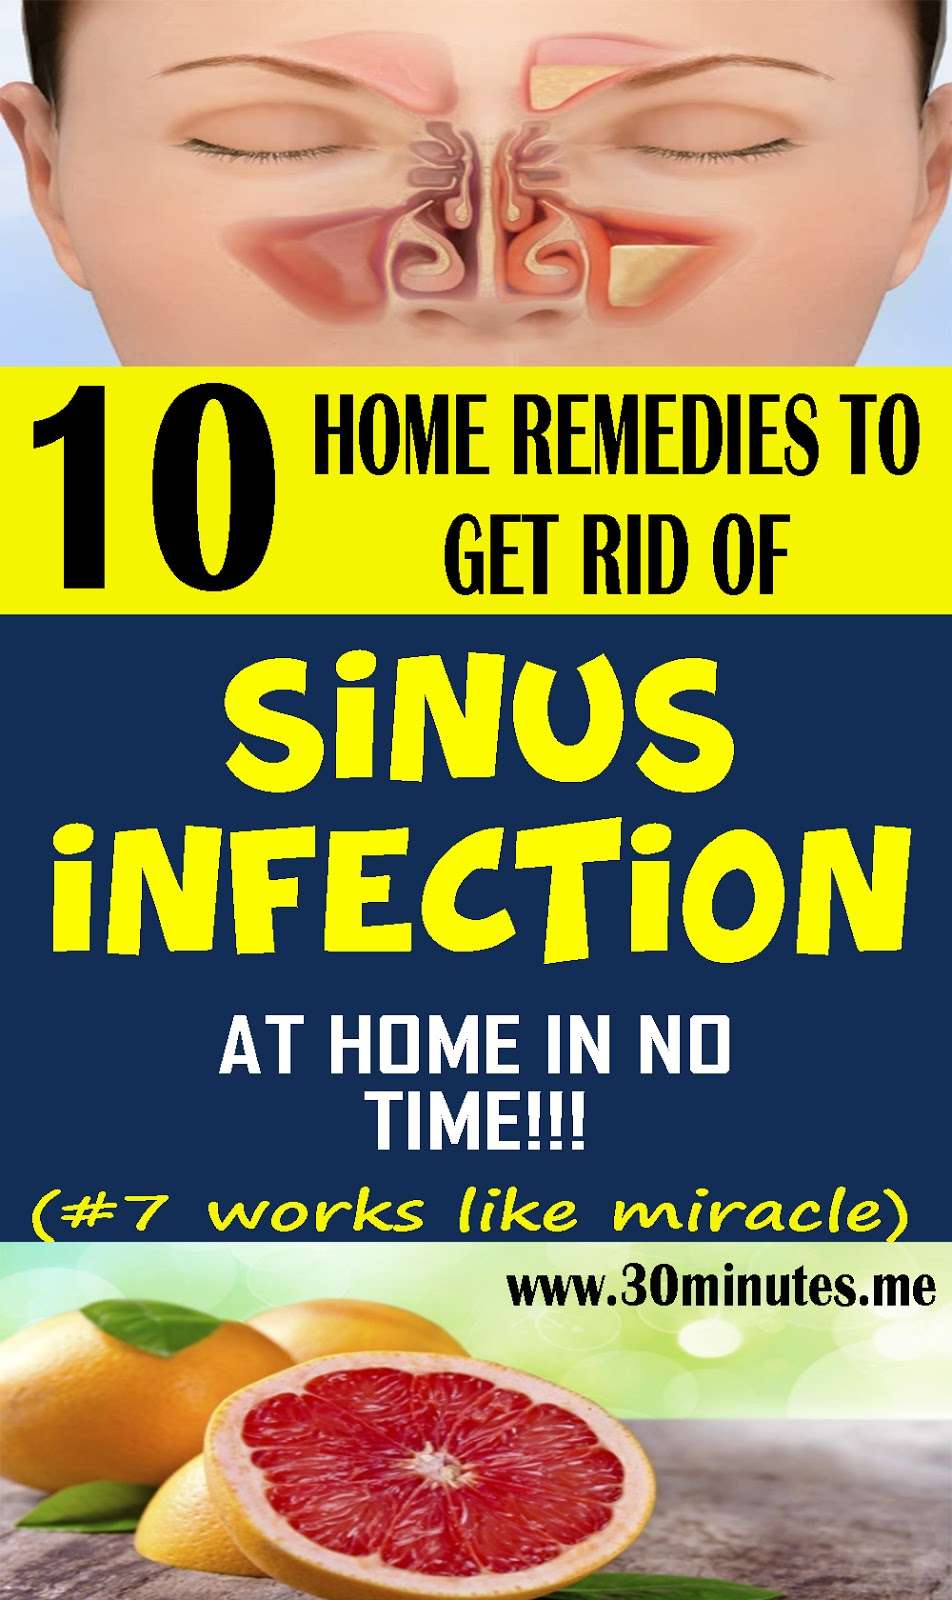 Sinus Infection Treatment: 10 Home Remedies